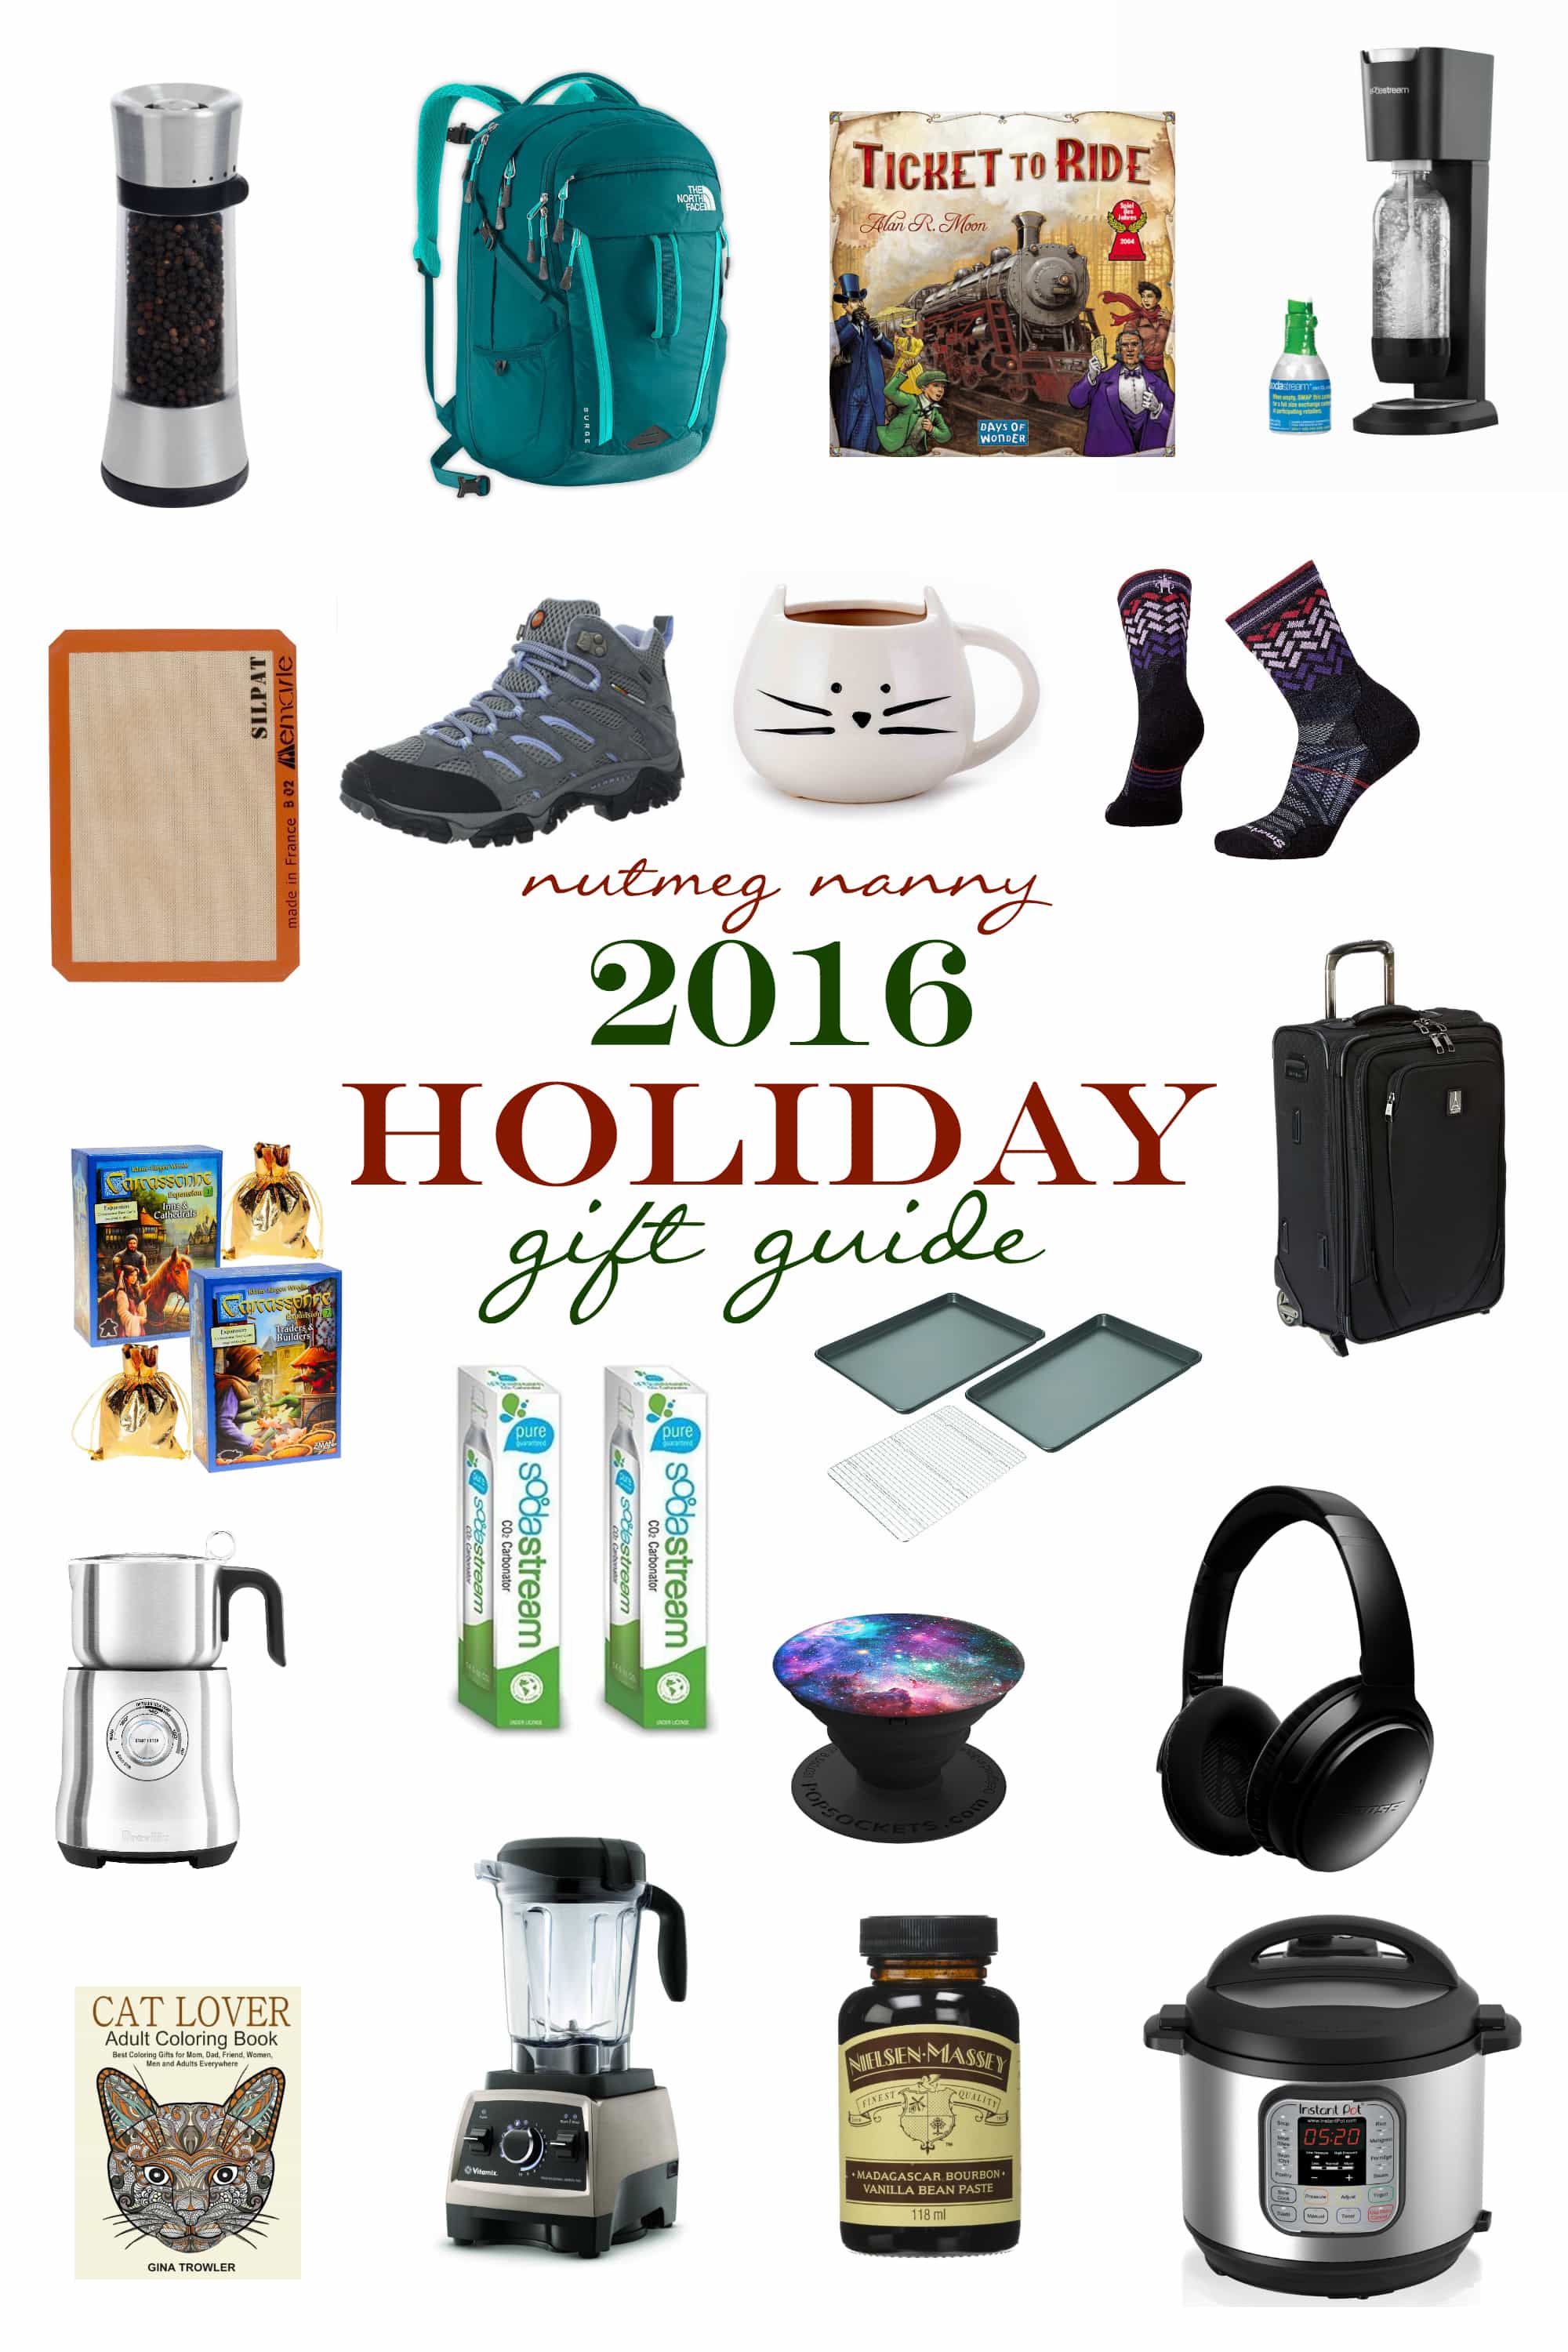 2016 Holiday Gift Guide for all the people in your life!